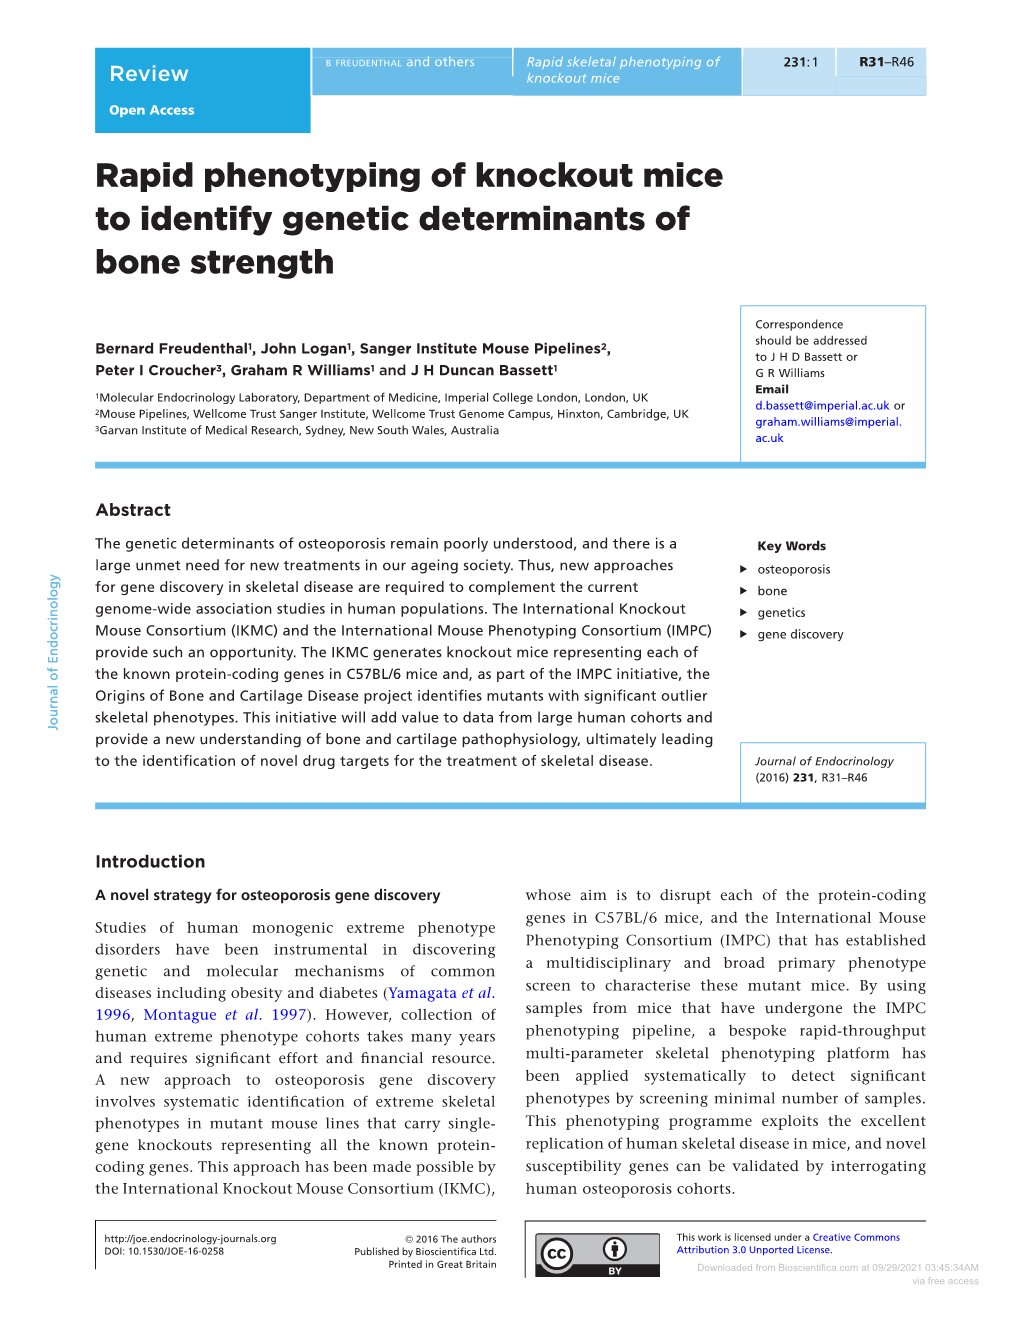 Rapid Phenotyping of Knockout Mice to Identify Genetic Determinants of Bone Strength